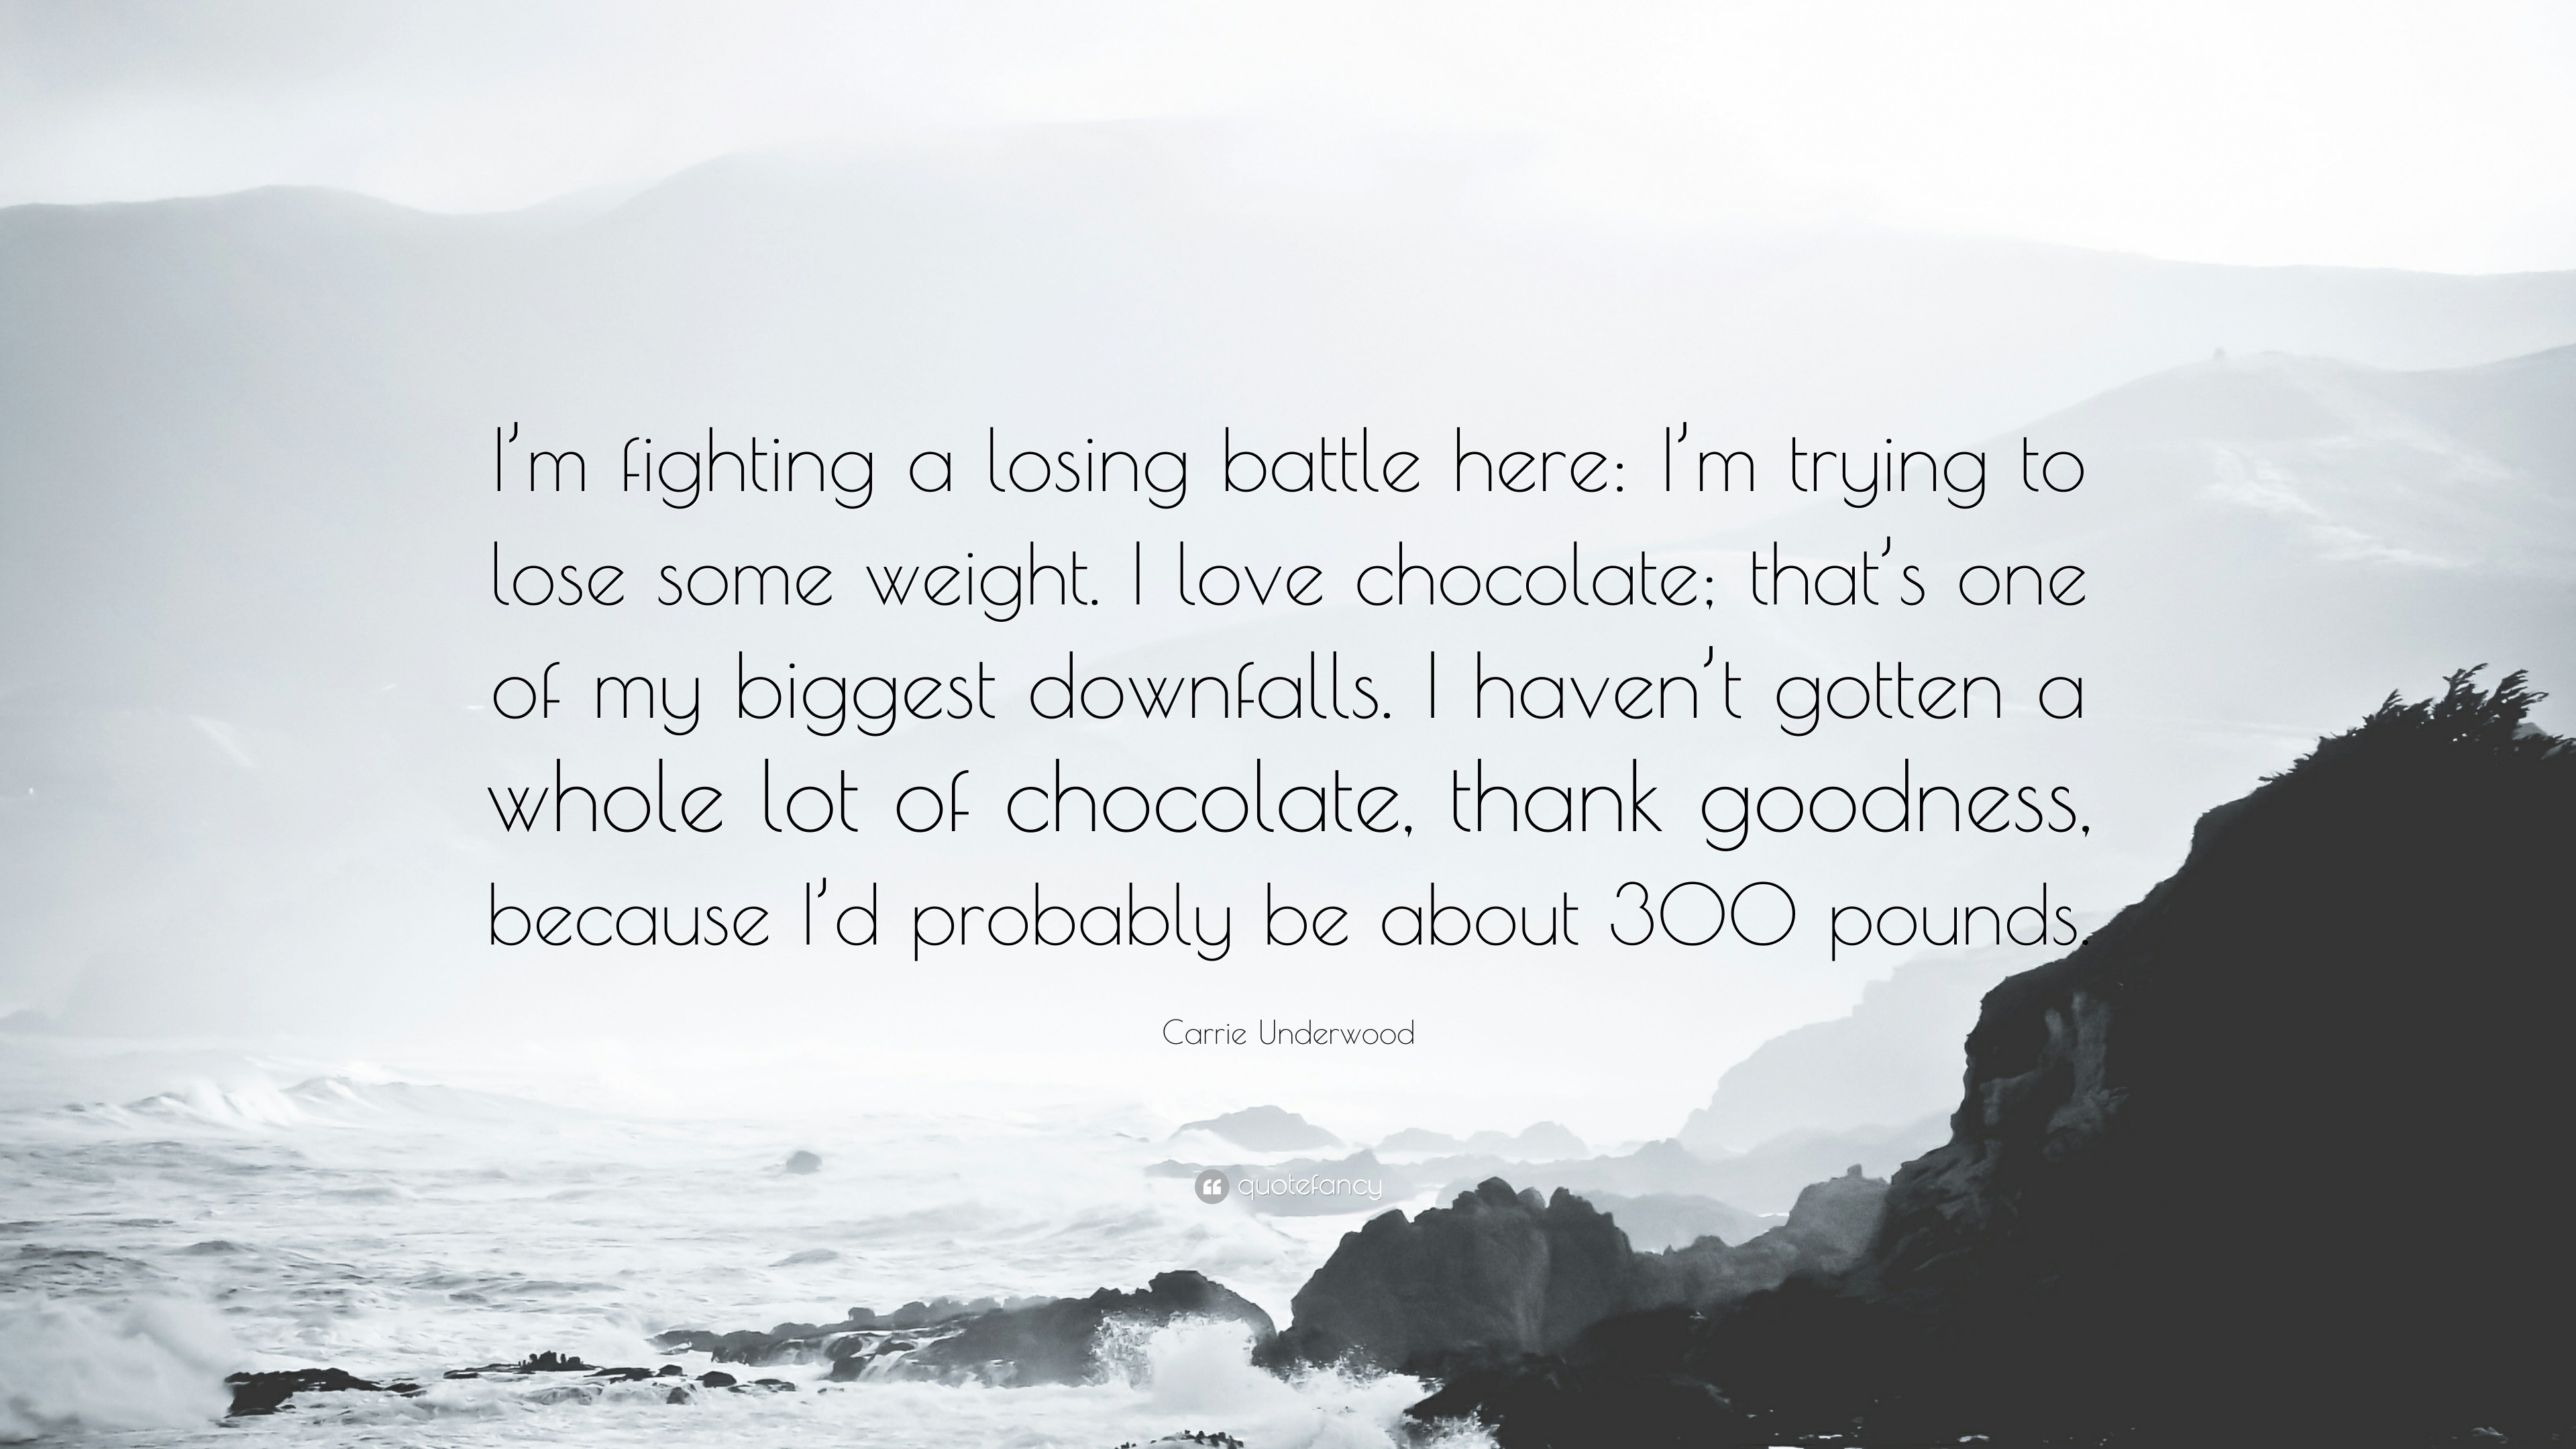 Carrie Underwood Quote: “I'm Fighting A Losing Battle Here: I'm Trying To Lose Some Weight. I Love Chocolate; That's One Of My Biggest Downfalls....”